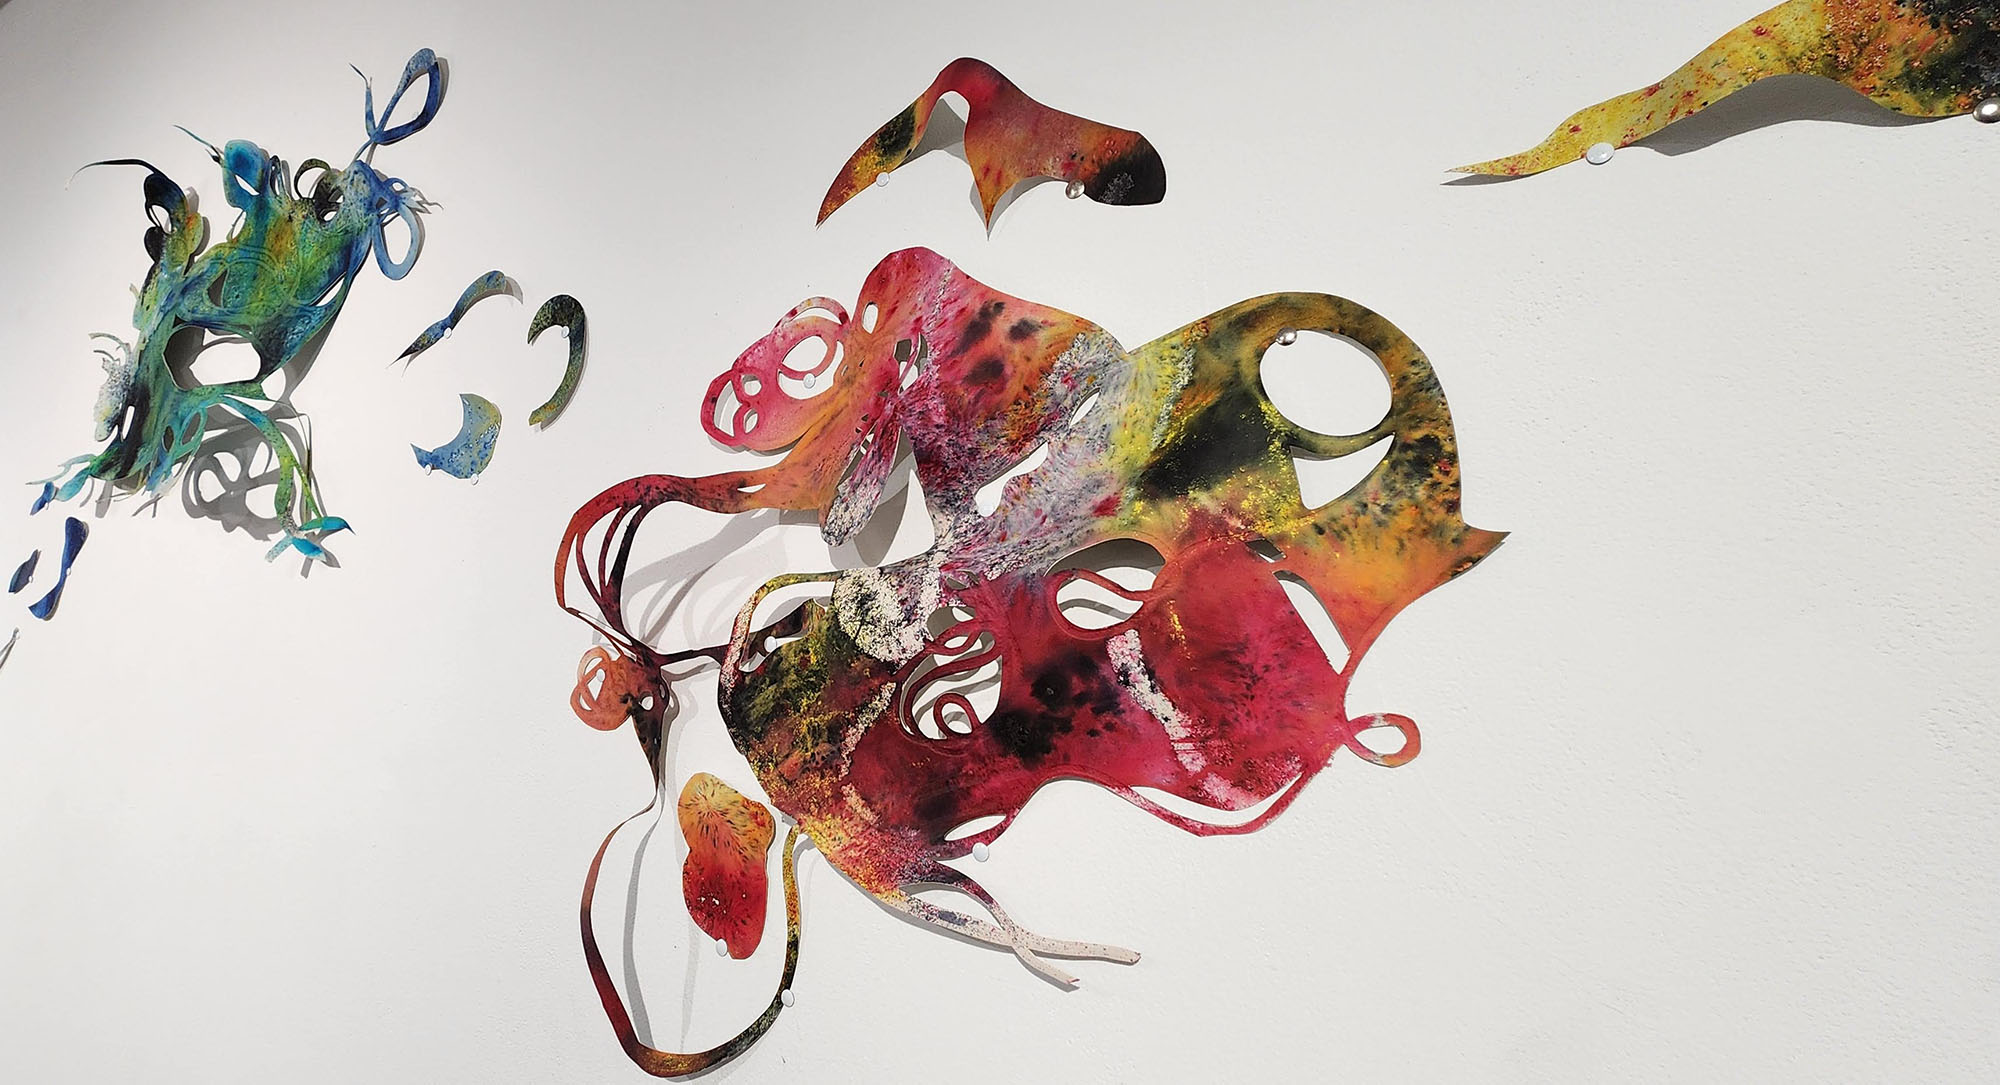 Swirling and colorful paper cut-outs hung on the wall.